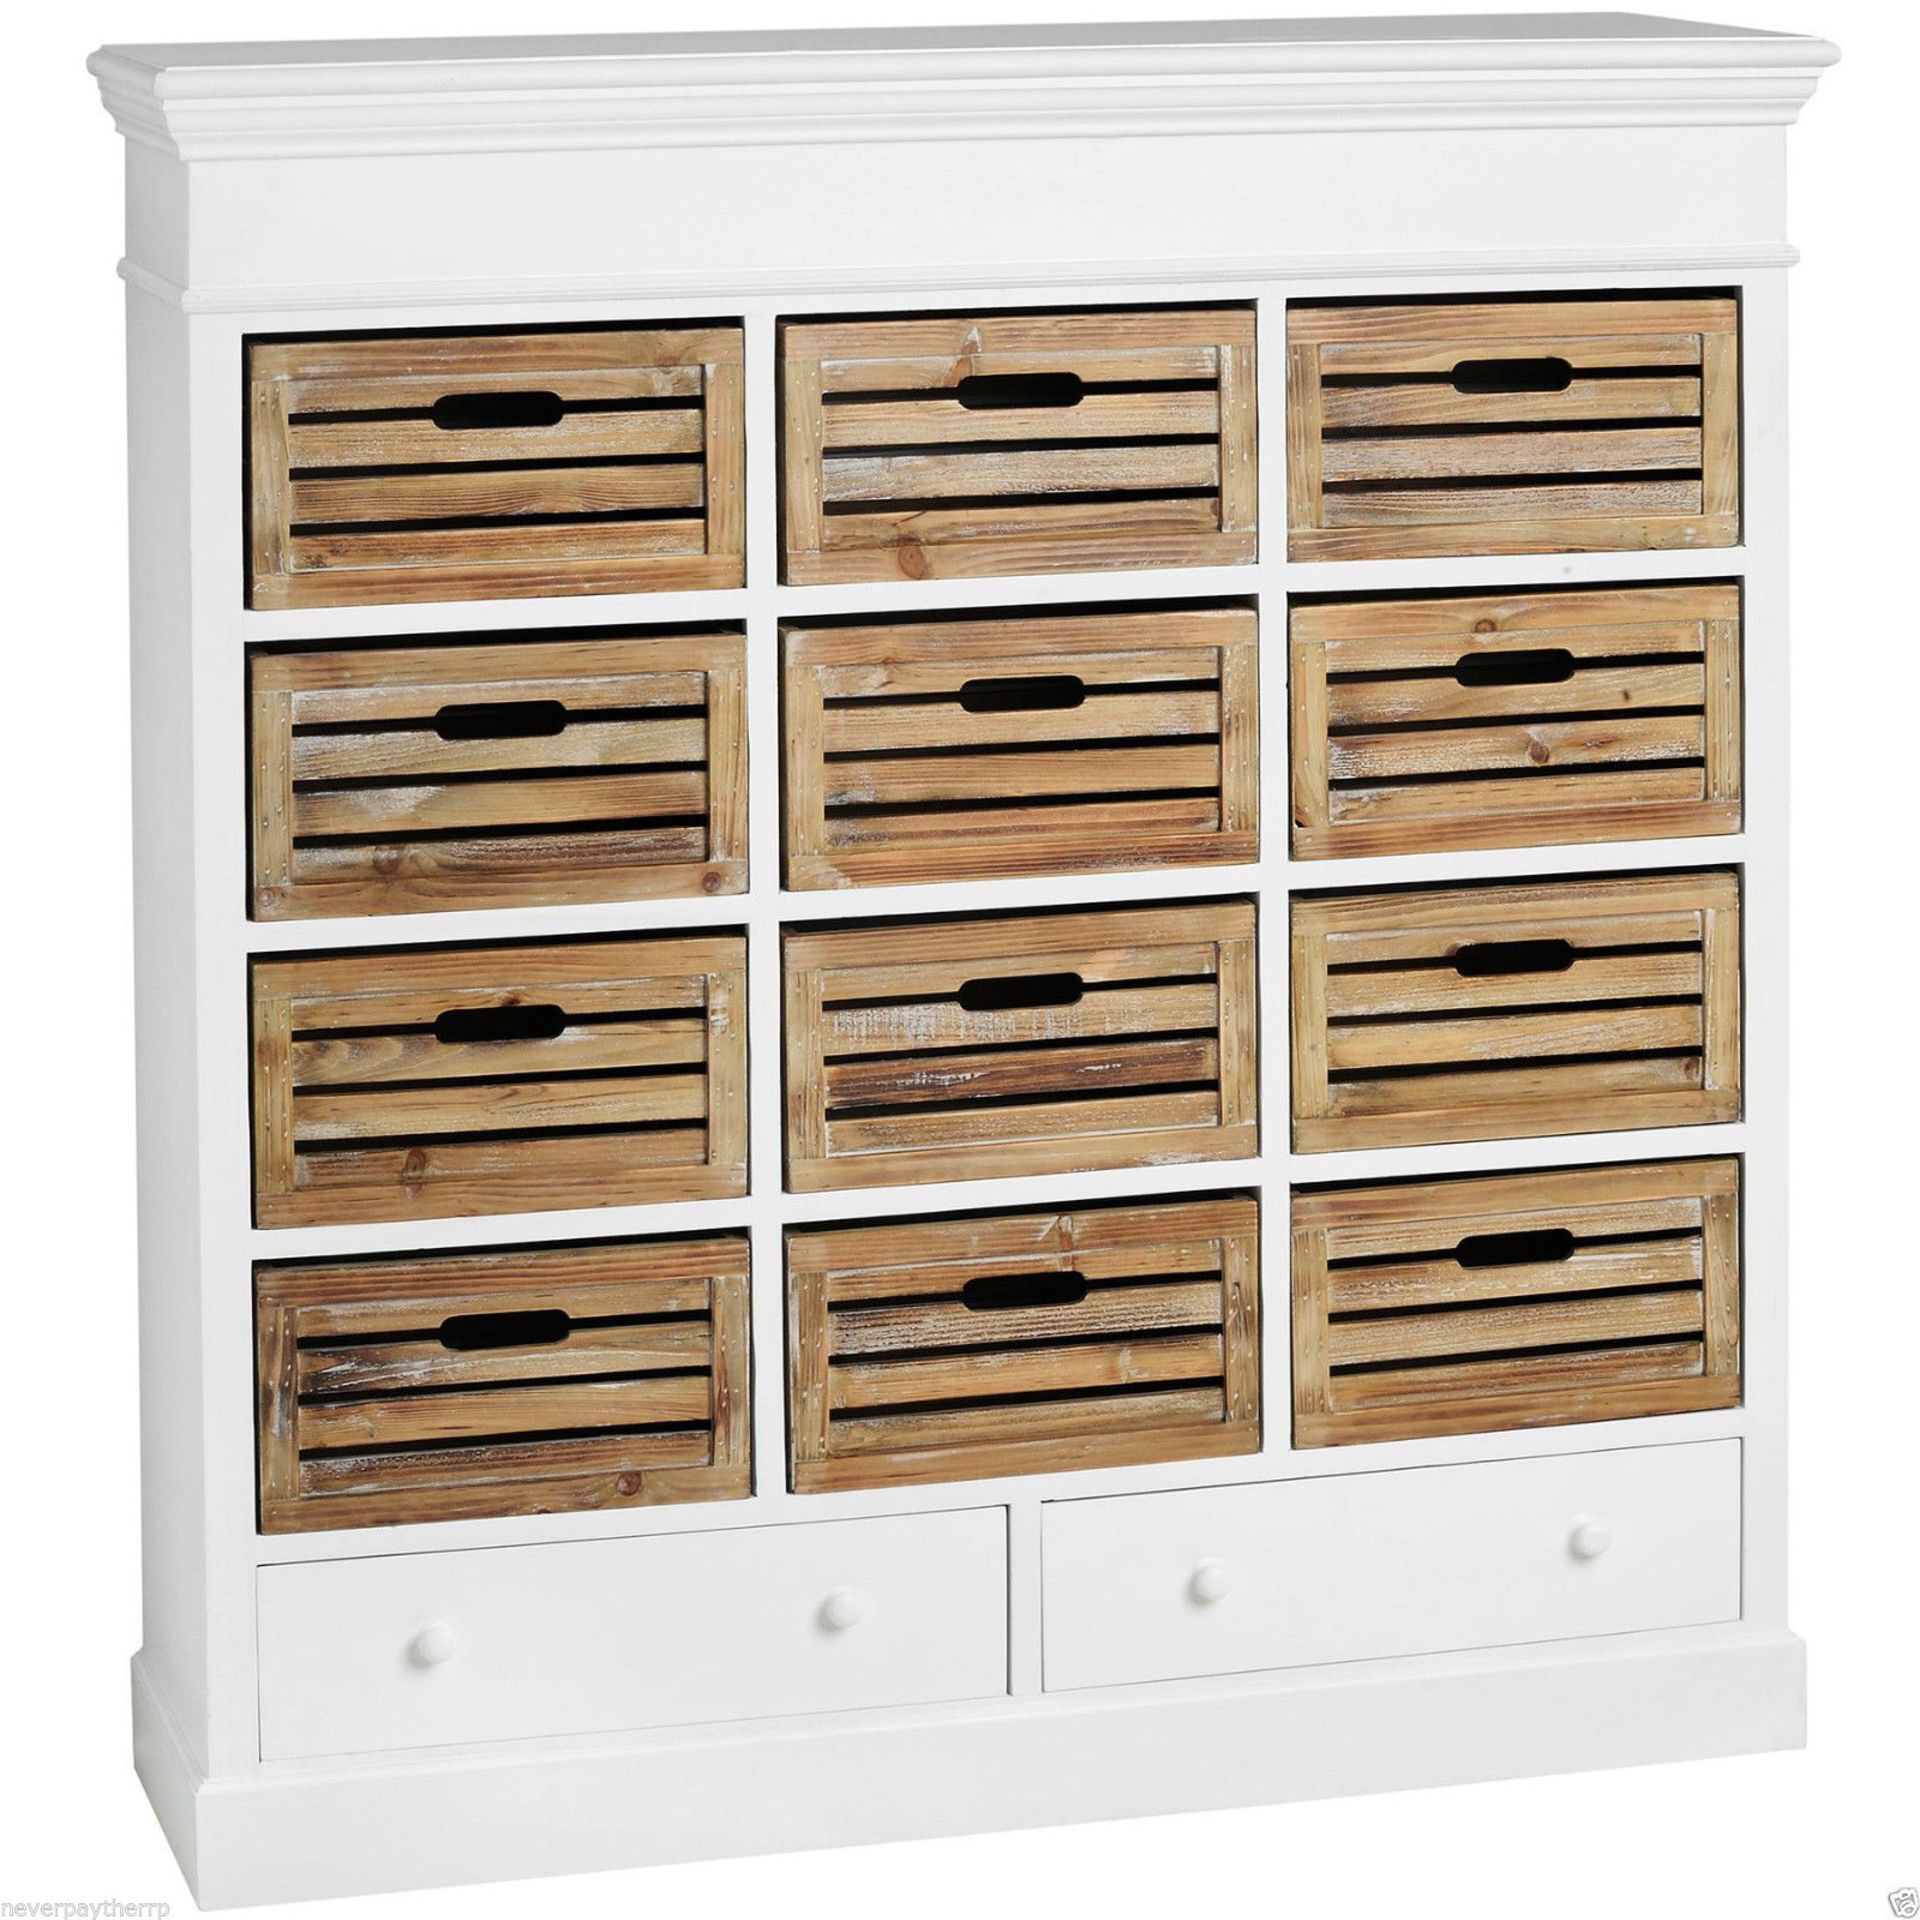 NEW Hampshire Large 14 Drawer Chest, Cabinet White / Natural, product code 13701 New and boxed